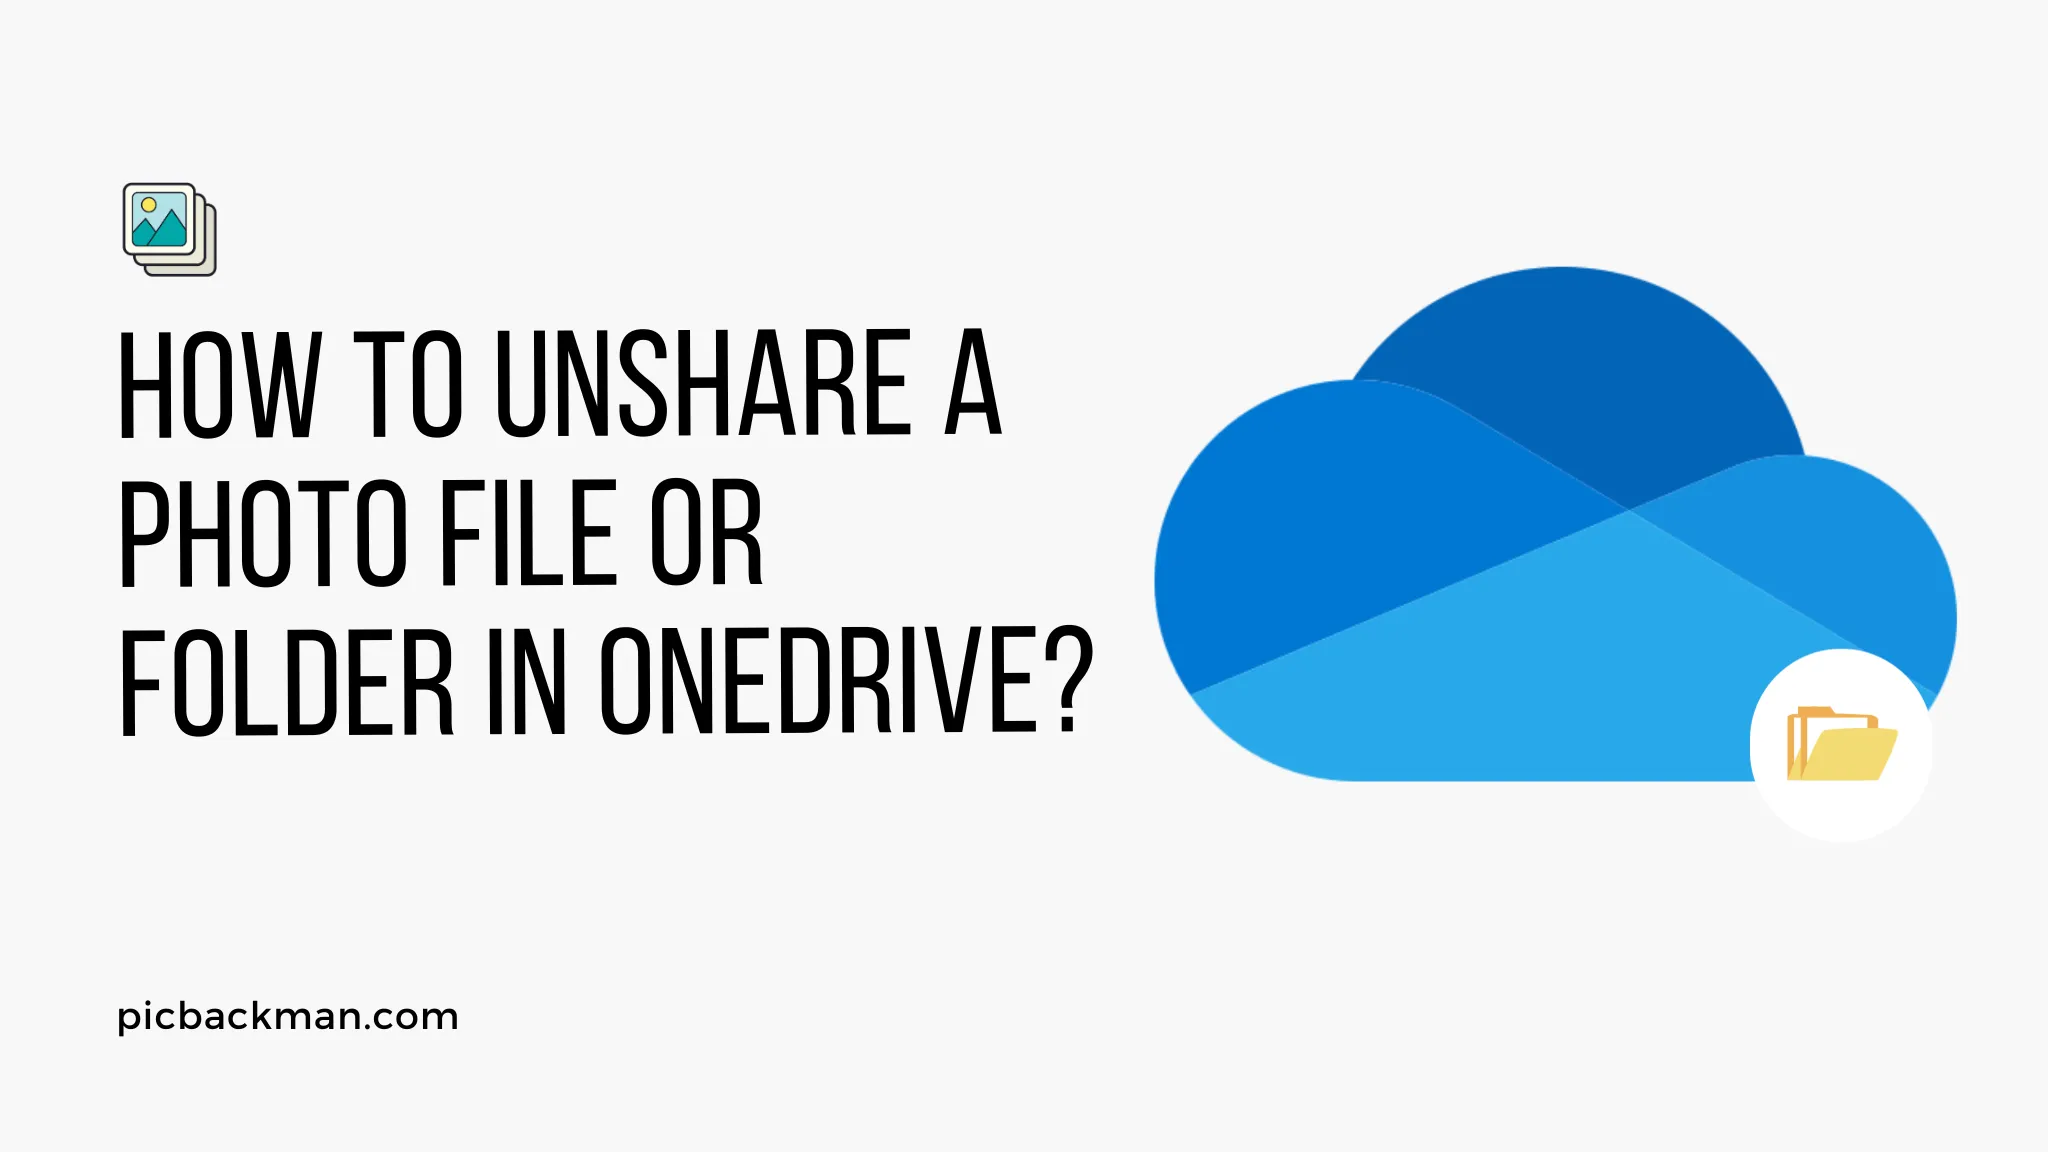 How to Unshare a Photo File or Folder in OneDrive?